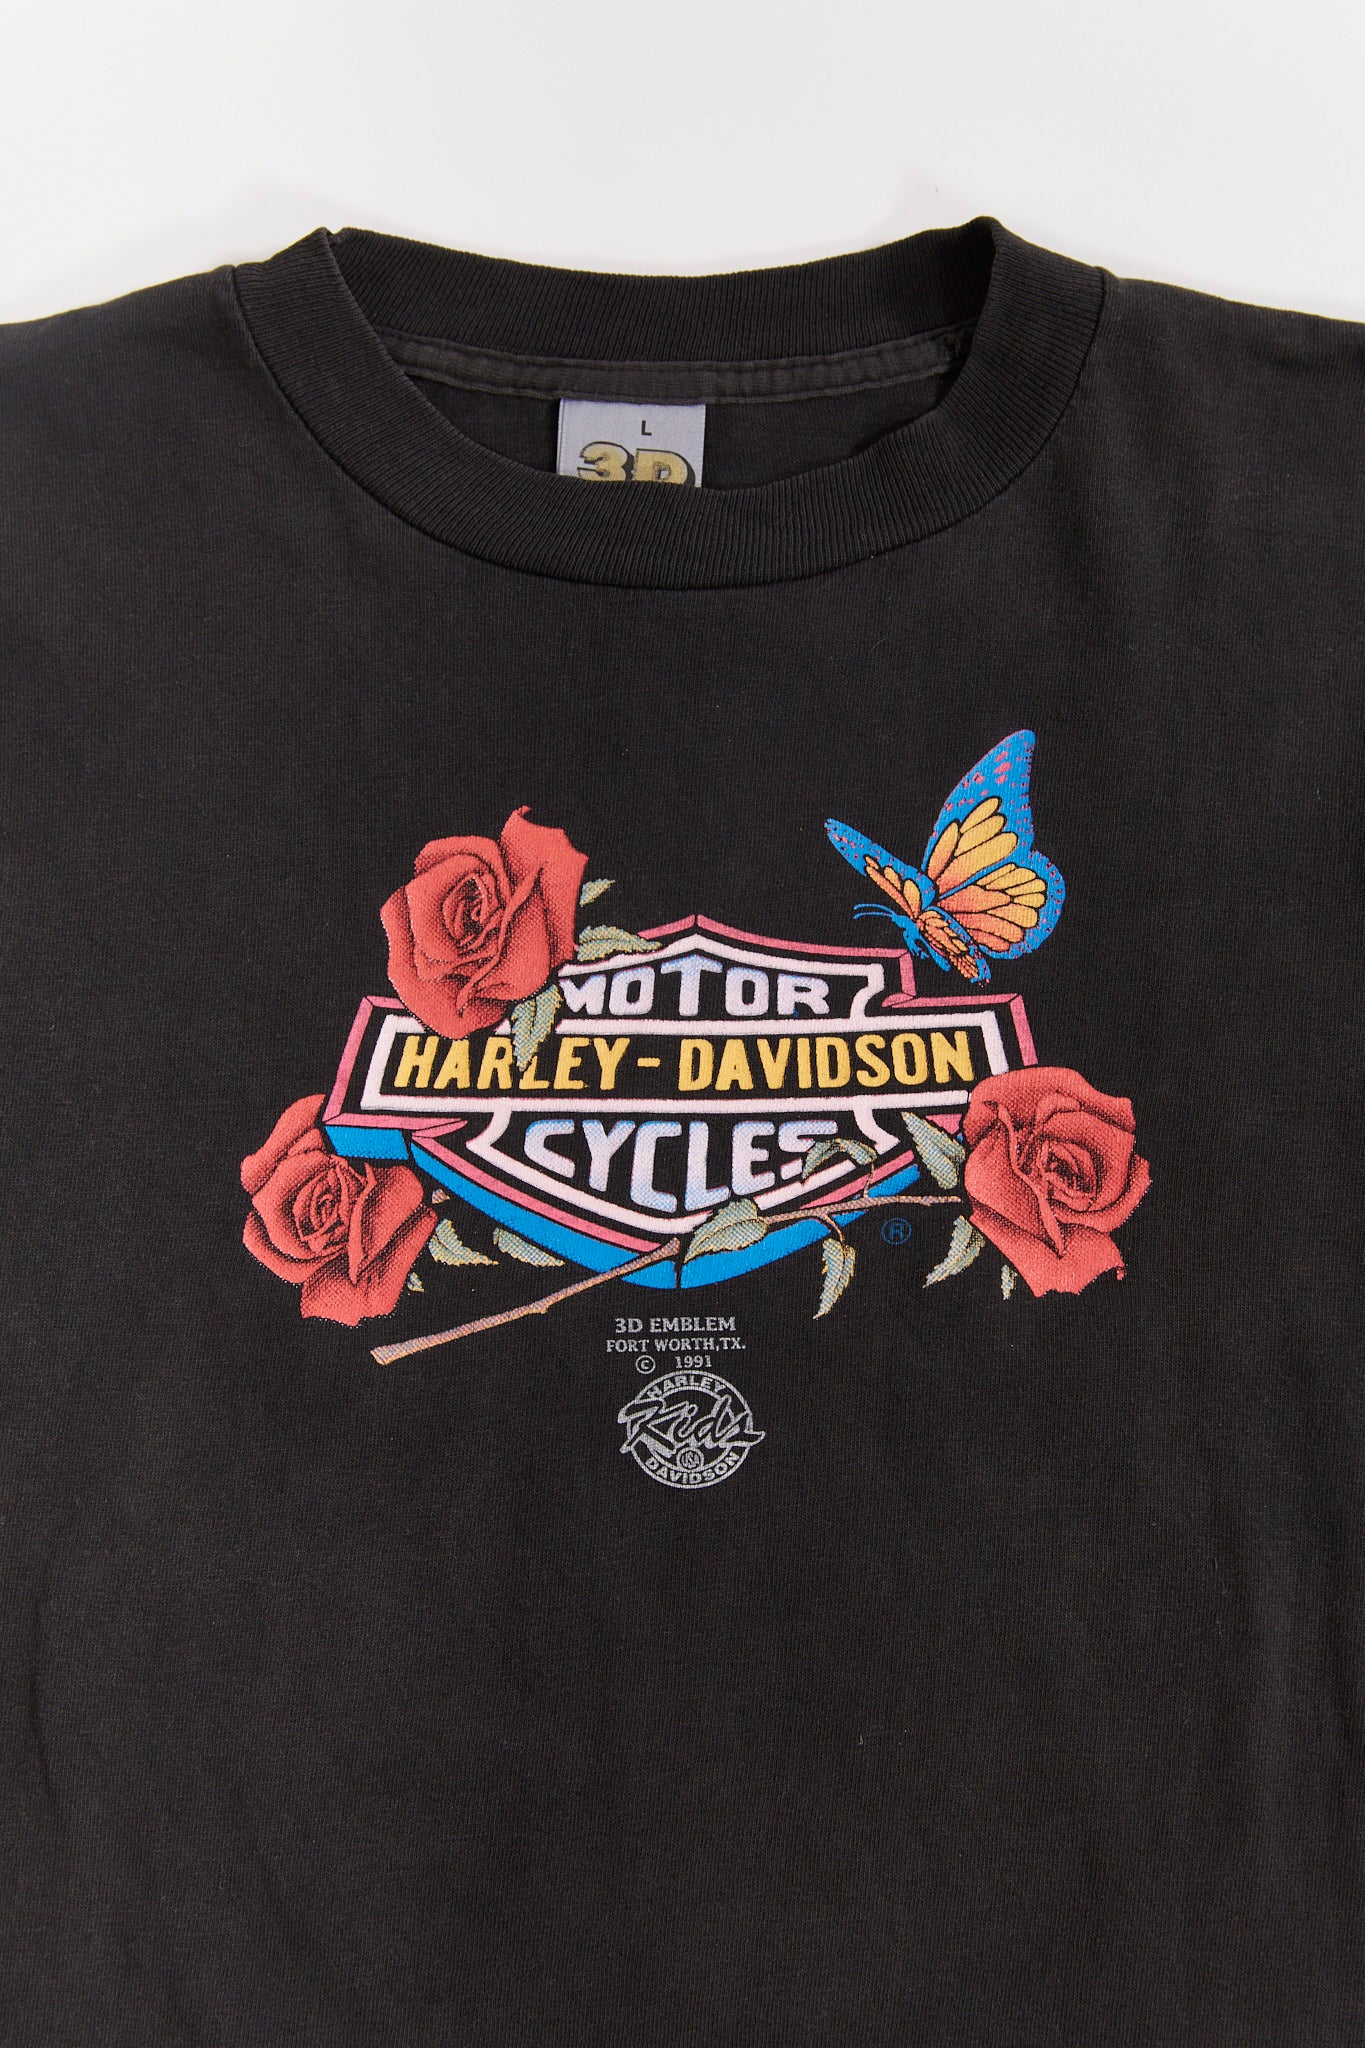 Vintage 1991 Harley-Davidson 3D Emblem Long-Sleeve| Harley Logo | roses &  butterfly| Motorcycle Graphic t-Shirt| (Men's Extra Small)